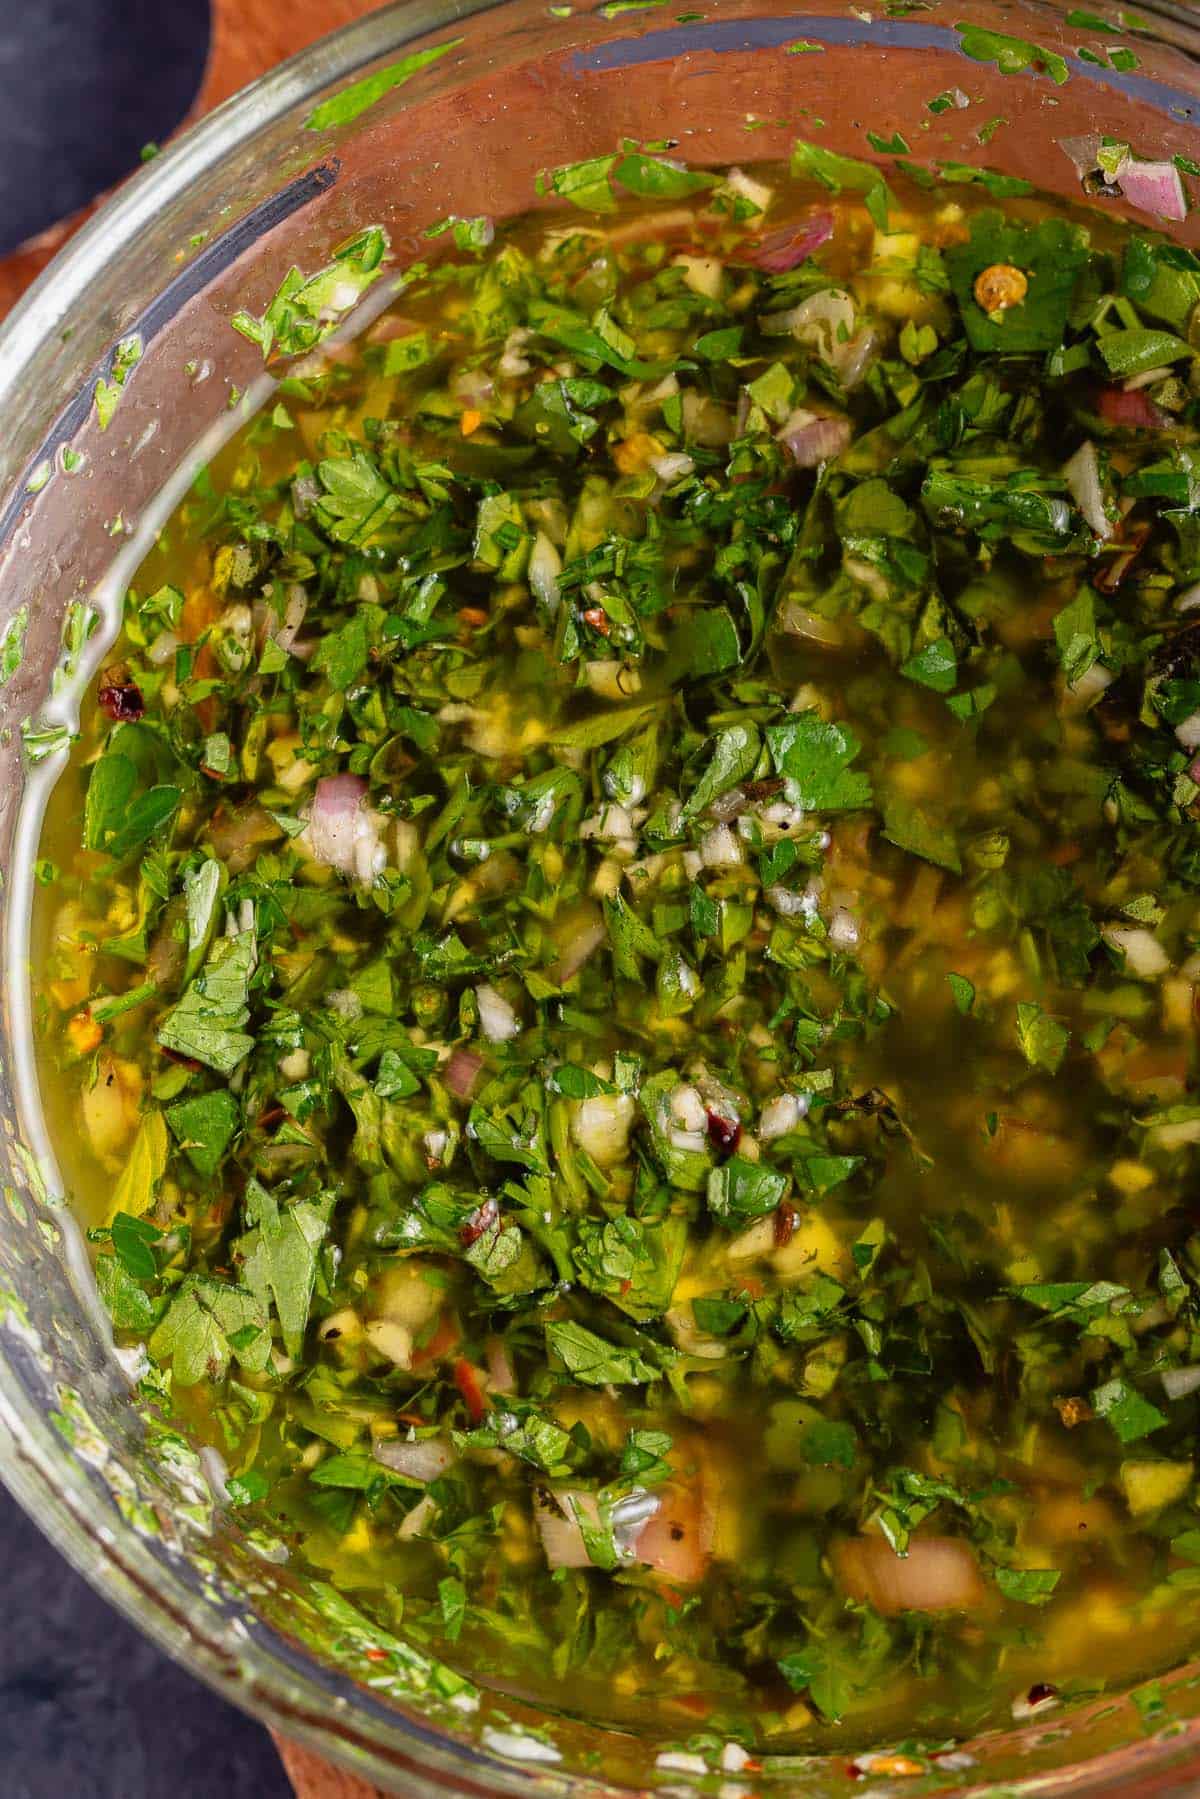 cloes up of fresh chimichurri sauce in glass bowl